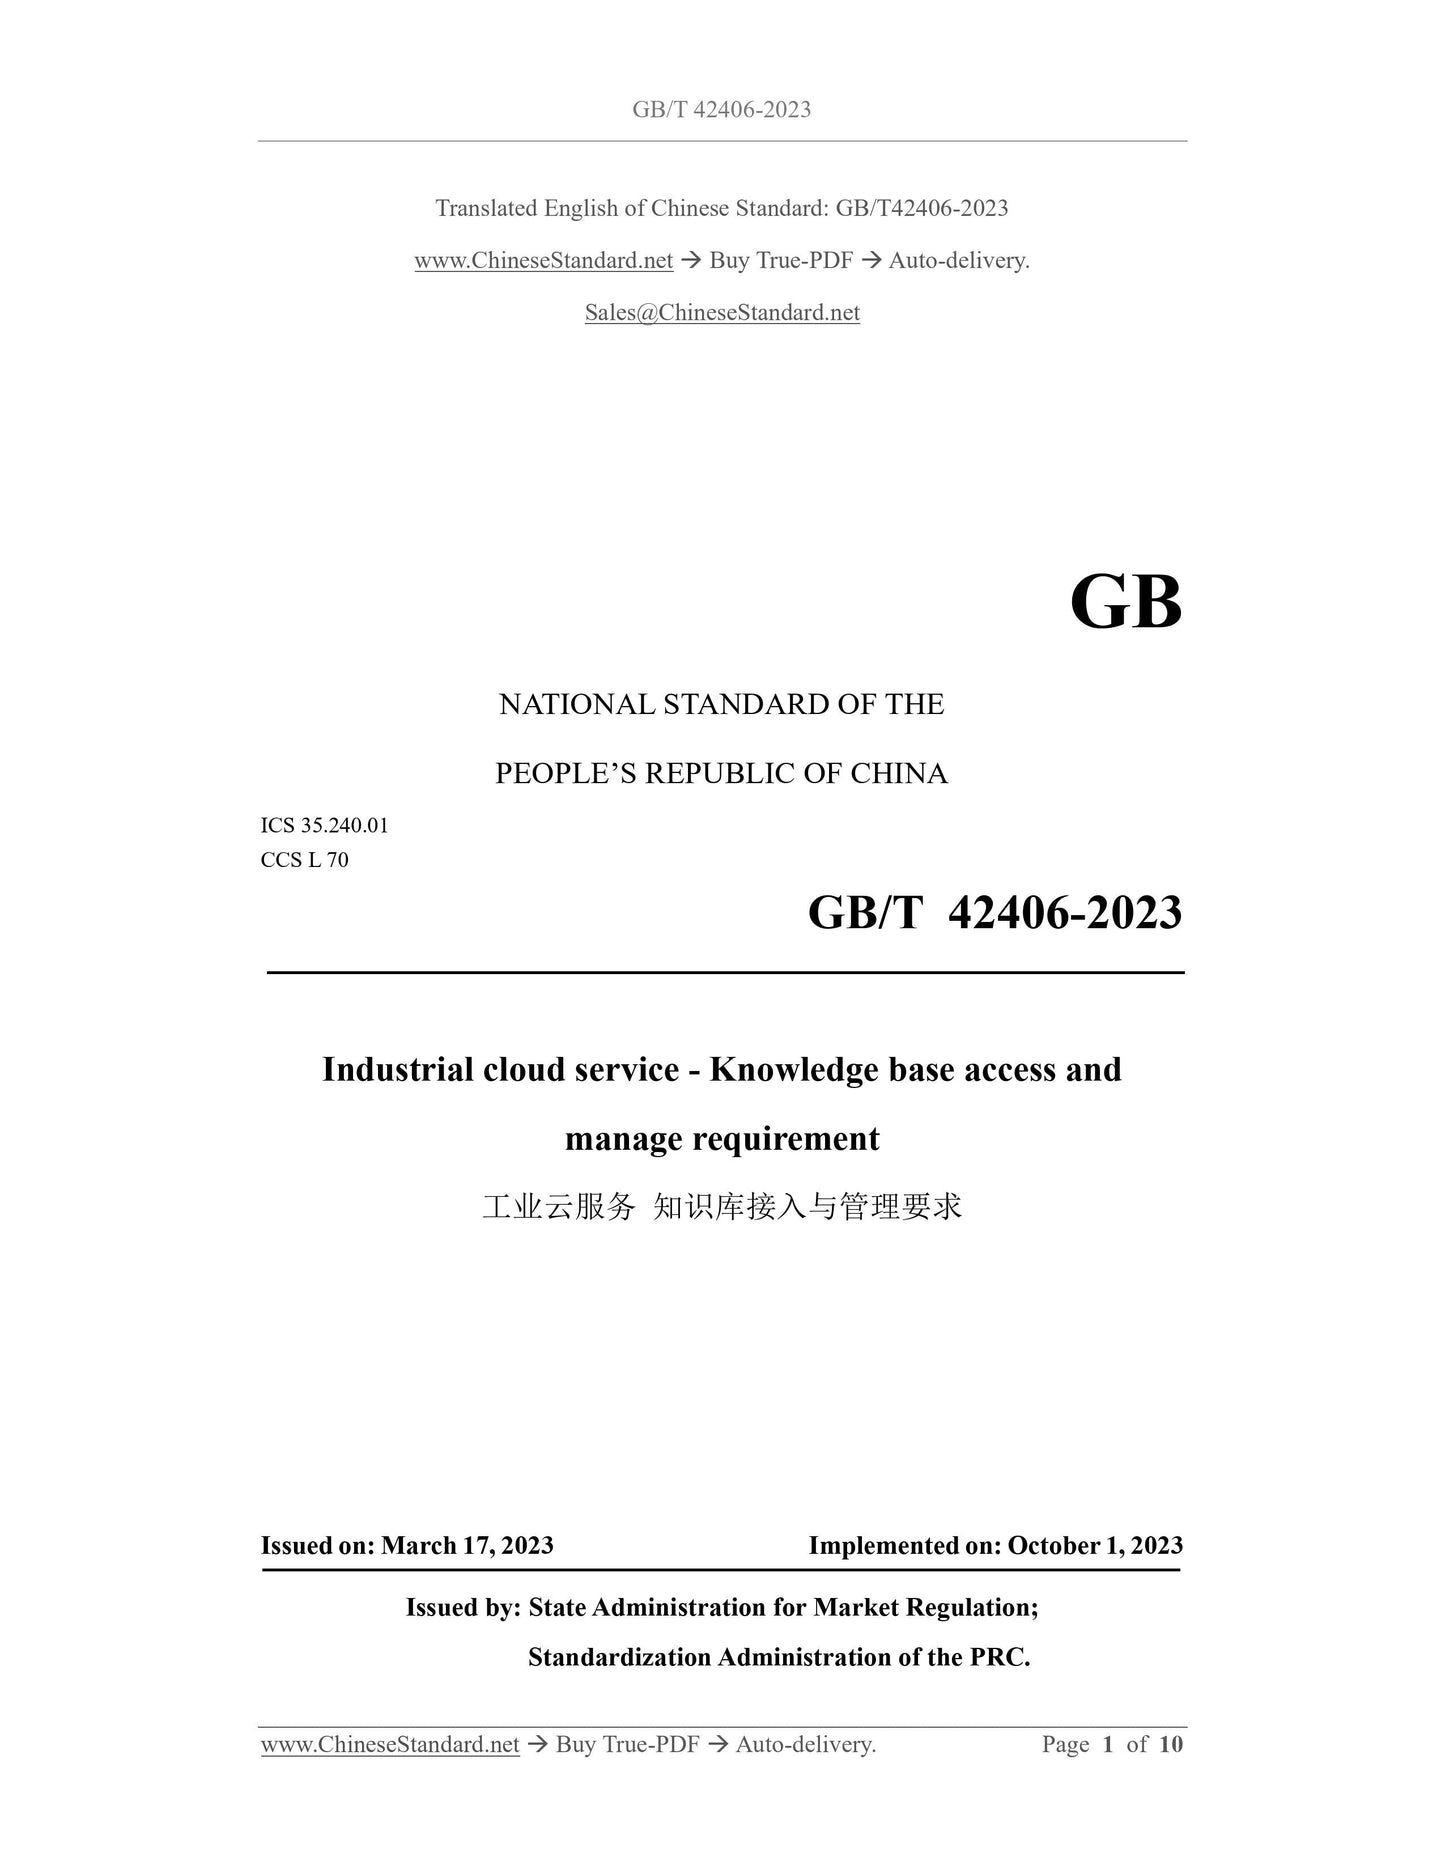 GB/T 42406-2023 Page 1